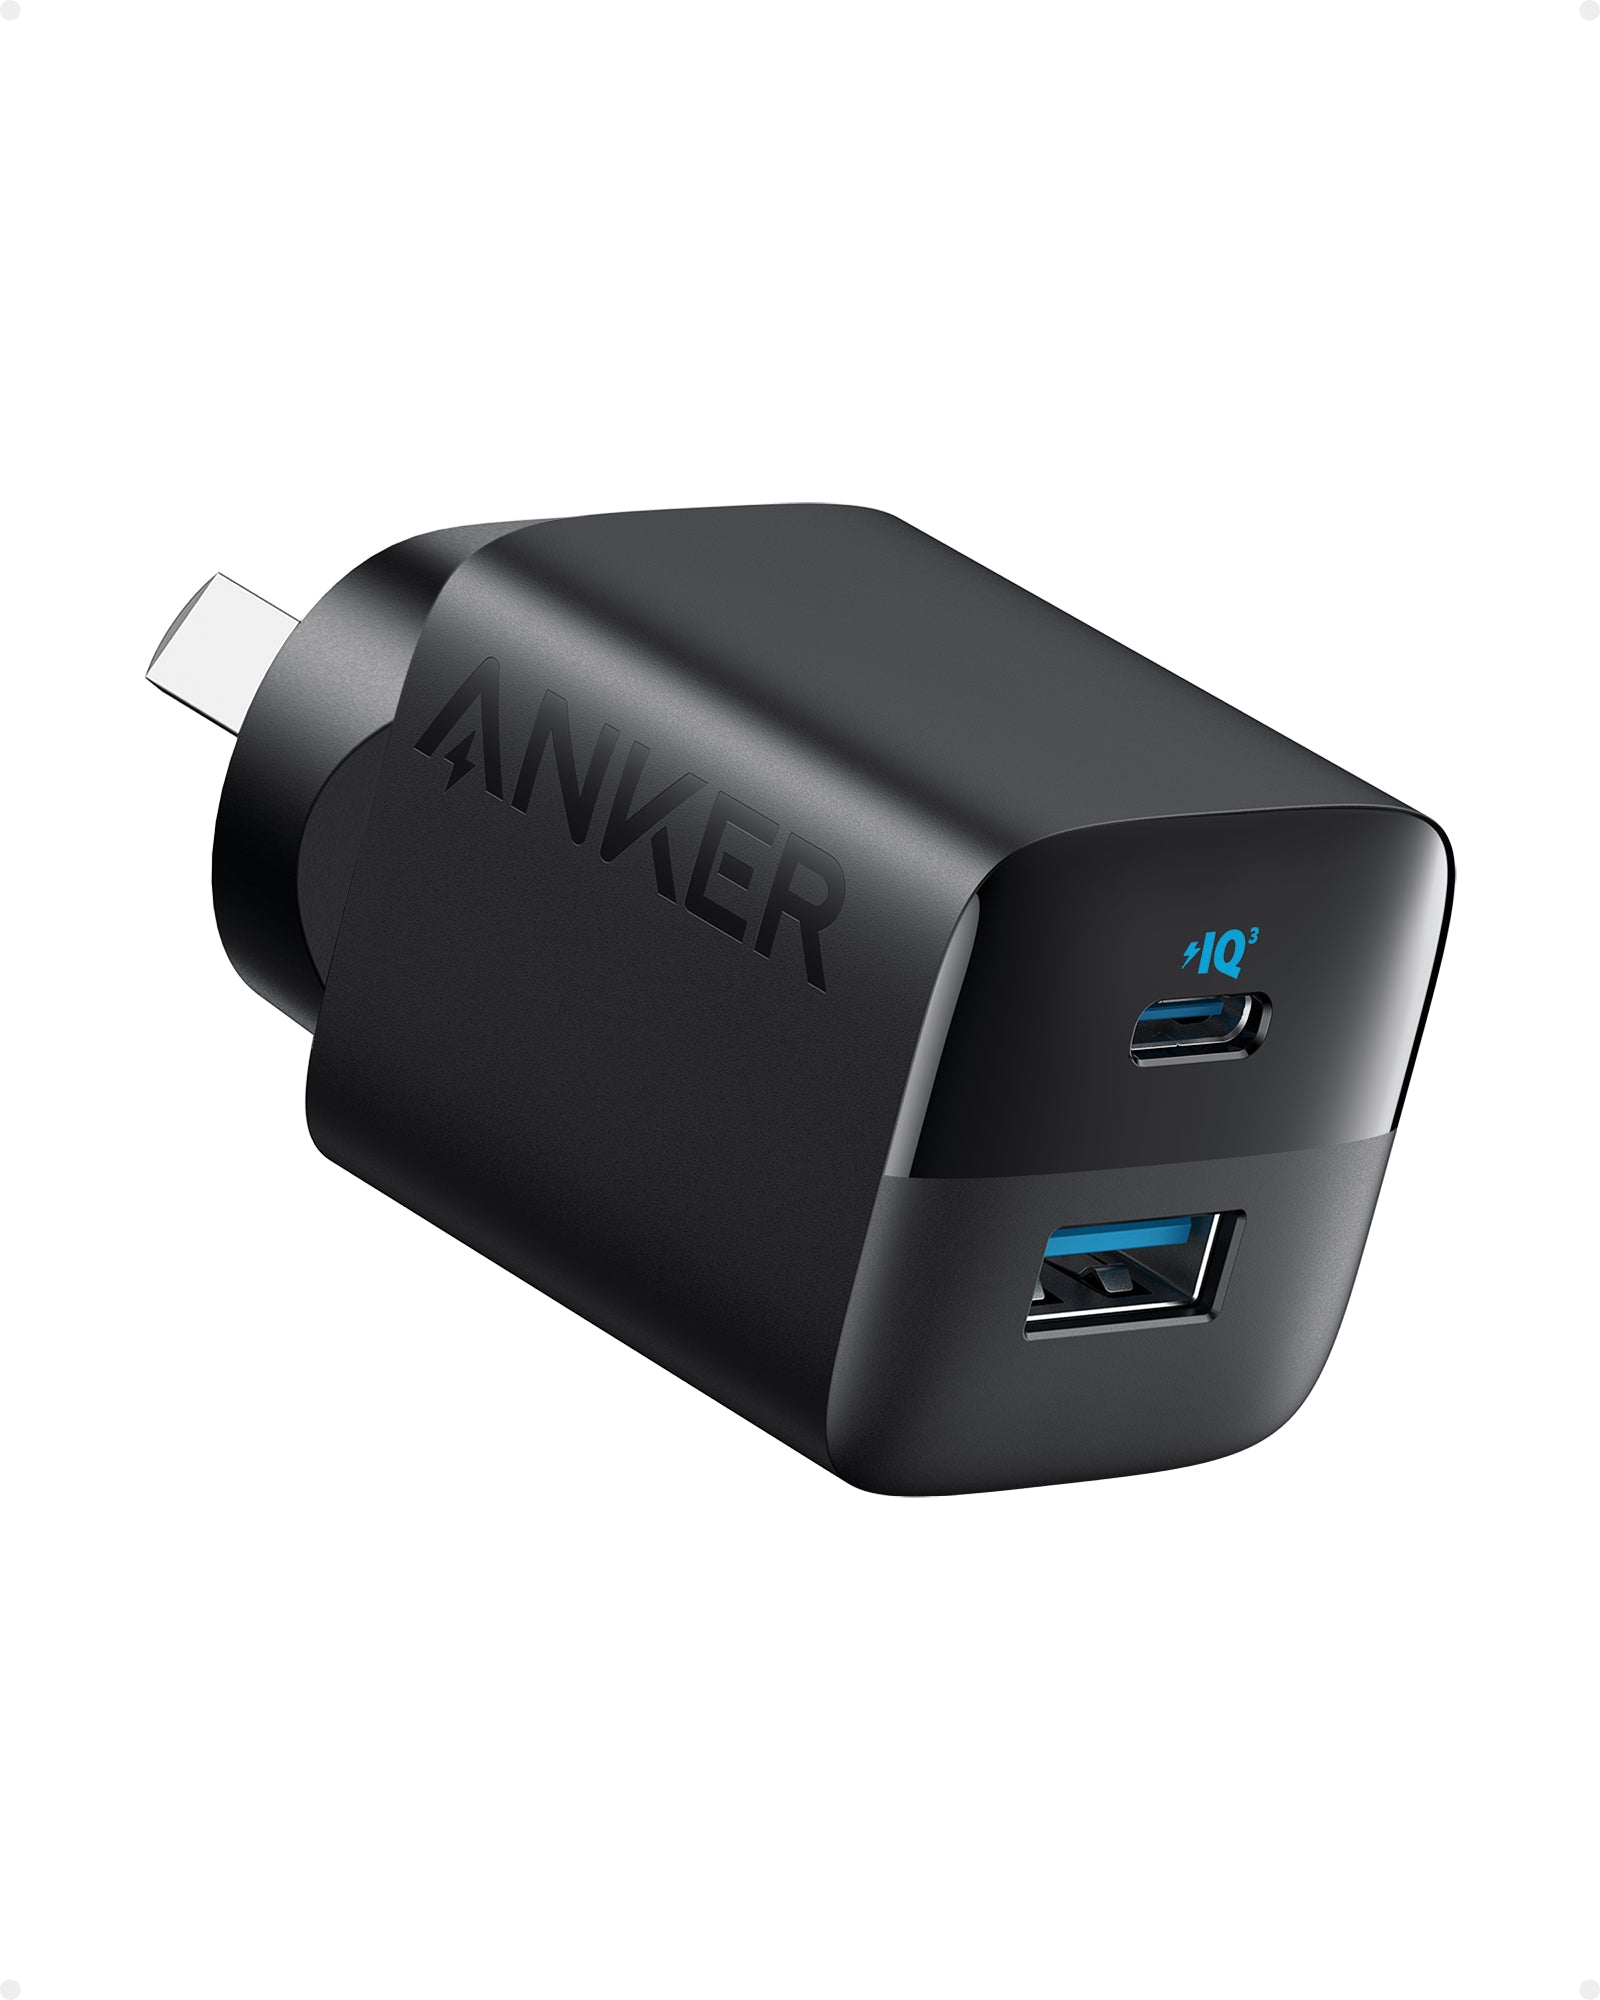  Anker USB C Charger 33W with Anker 2 Pack USB C Cable : Cell  Phones & Accessories